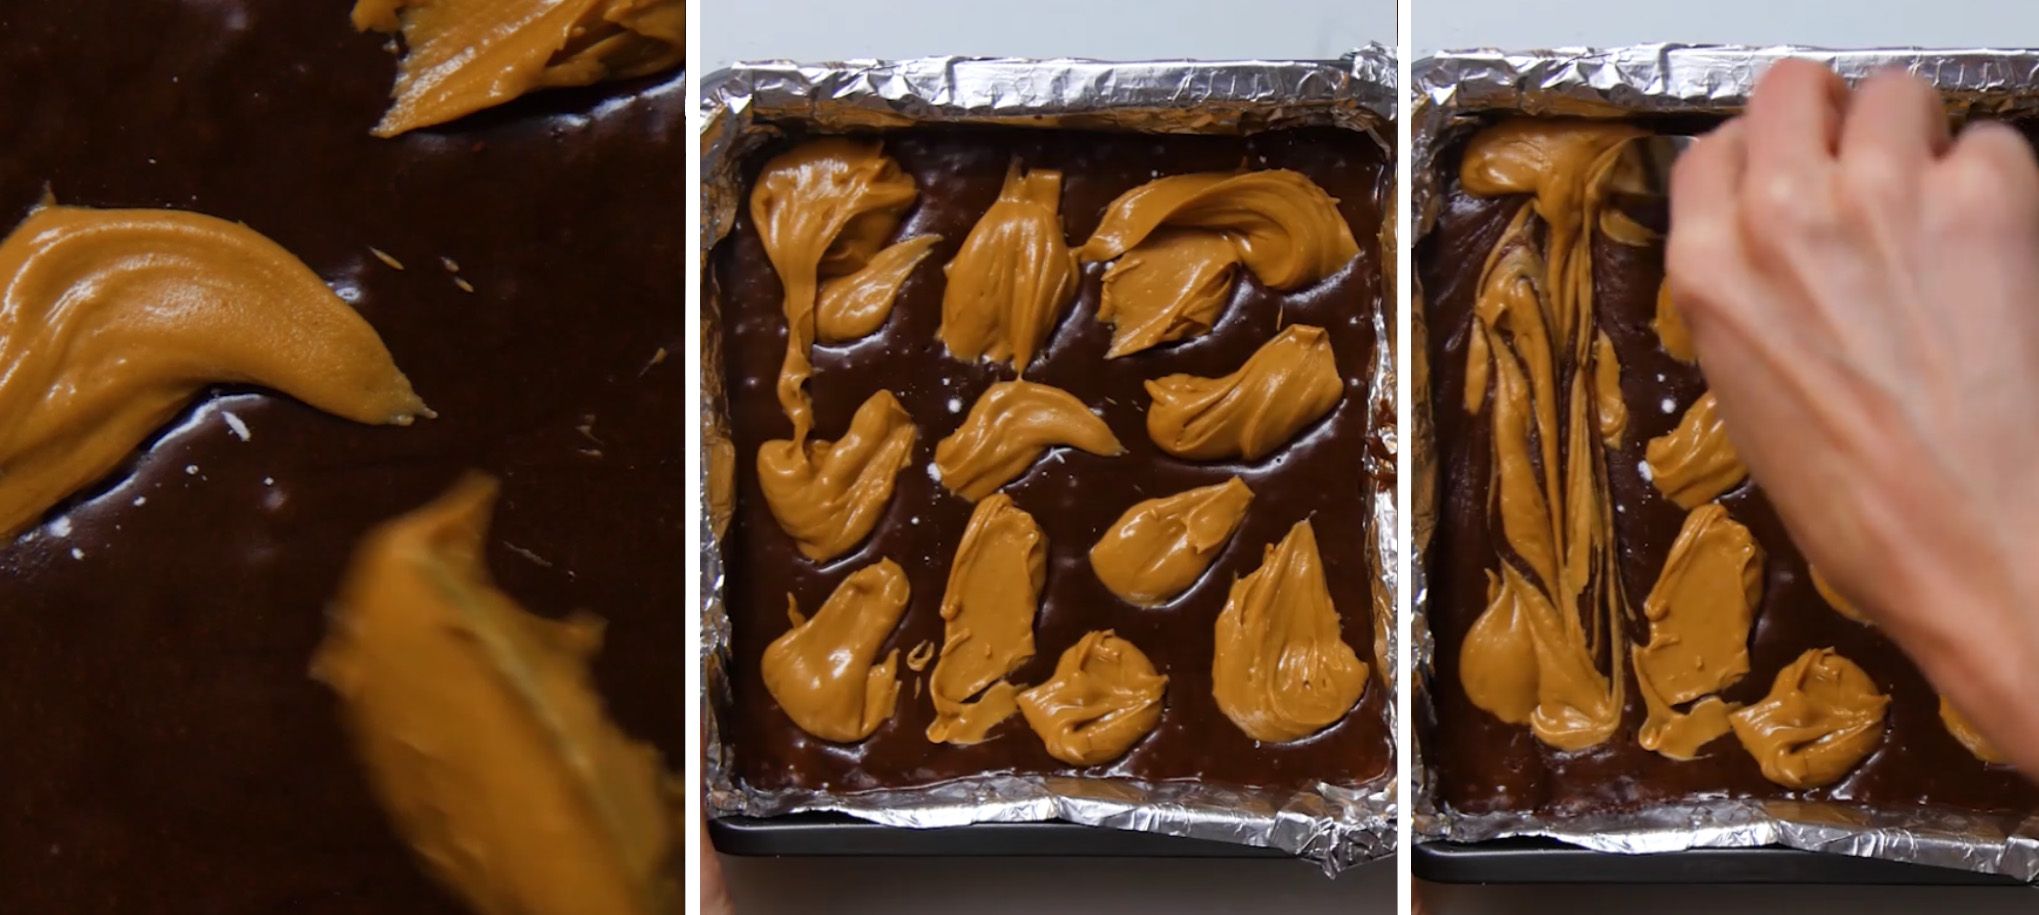 fetish brownies being layered with peanut butter layer